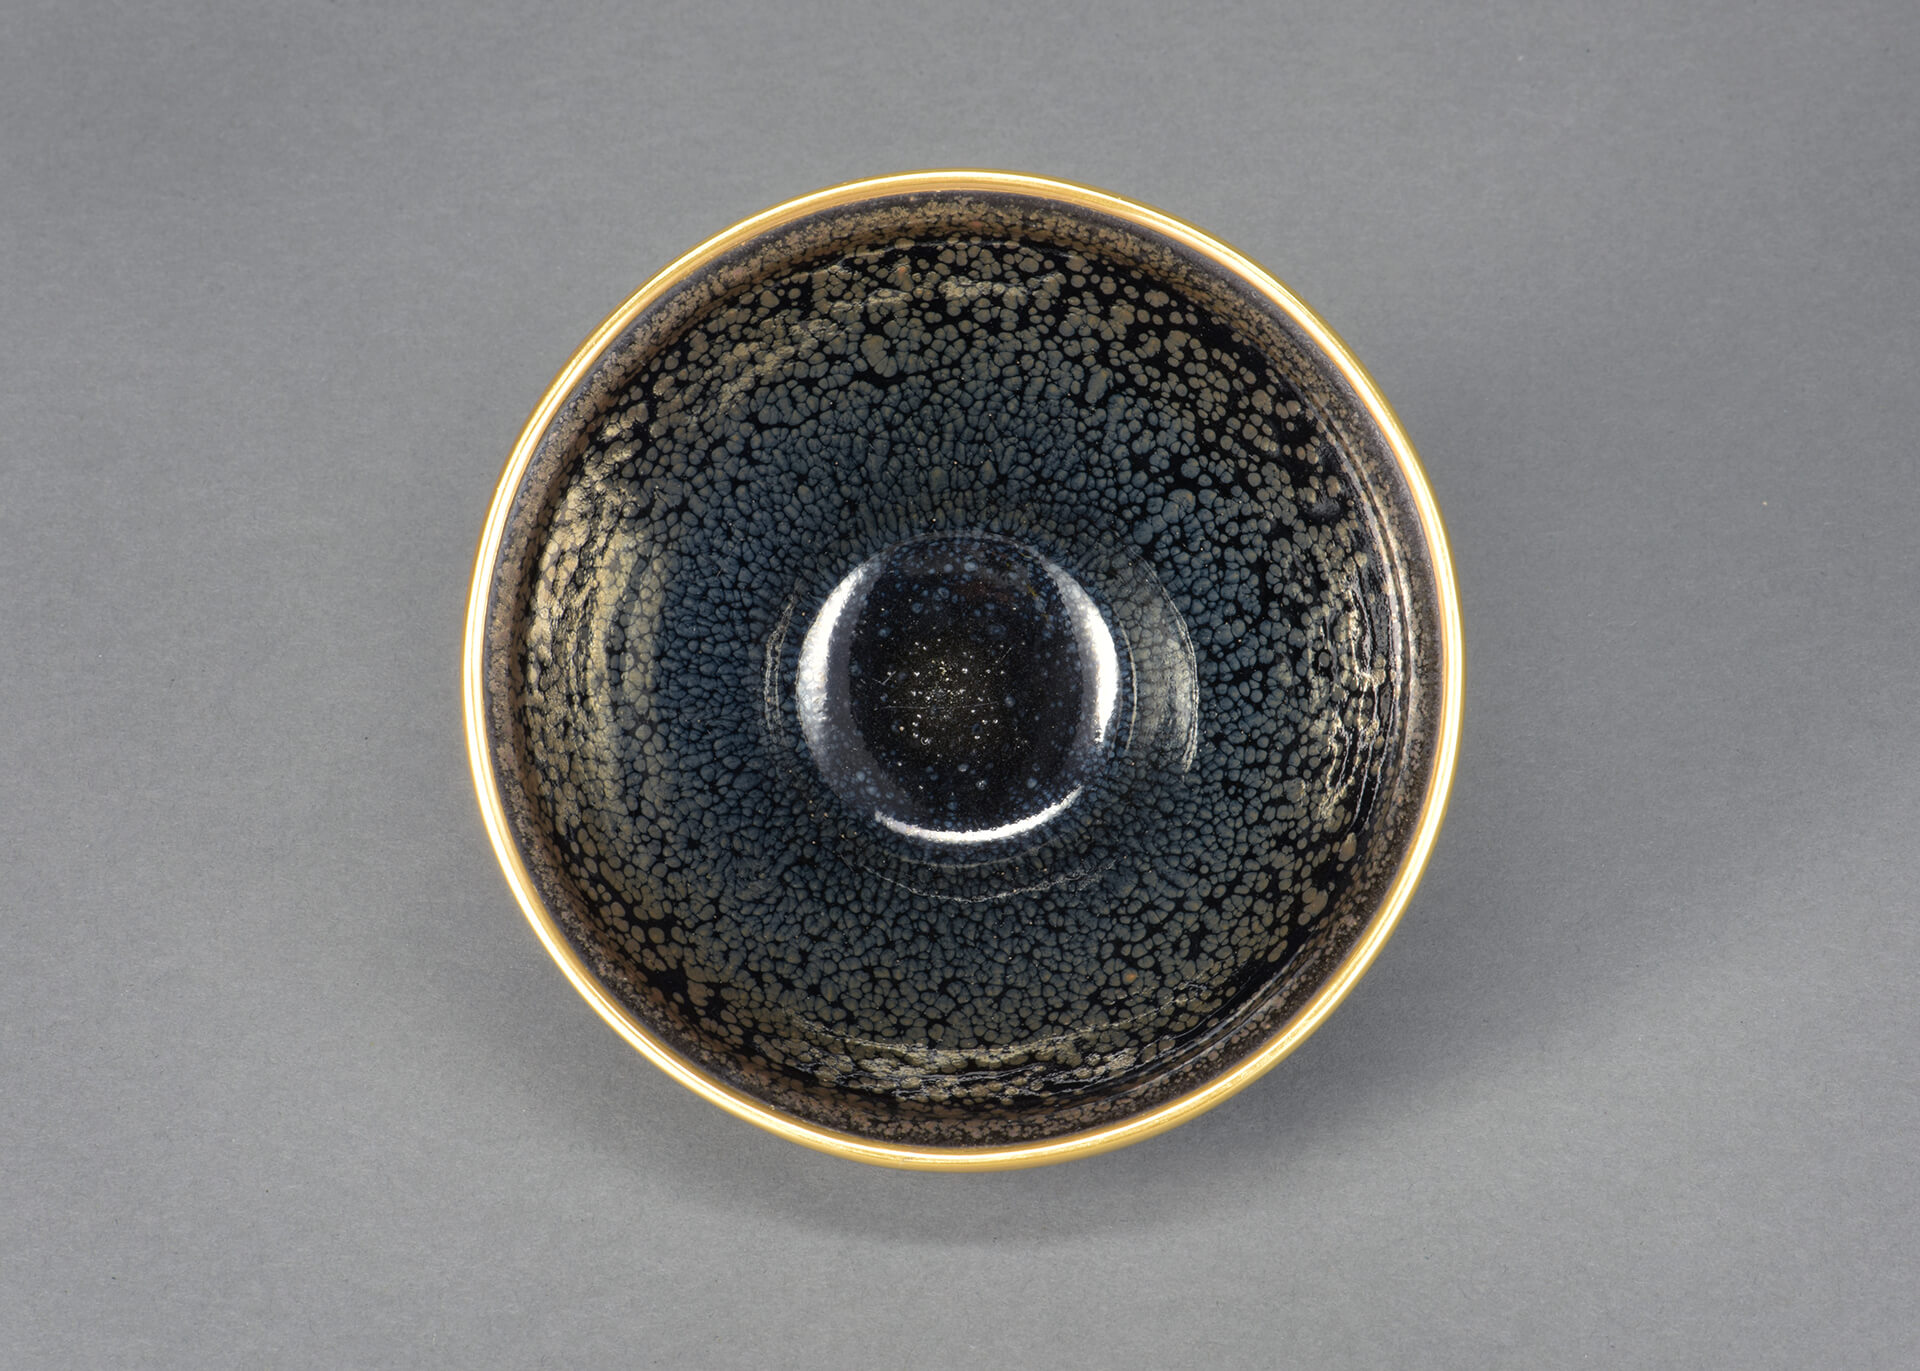 Southern Song dynasty, 12th-13th century Jian ware Tea bowl with silvery spots against Tenmoku glaze